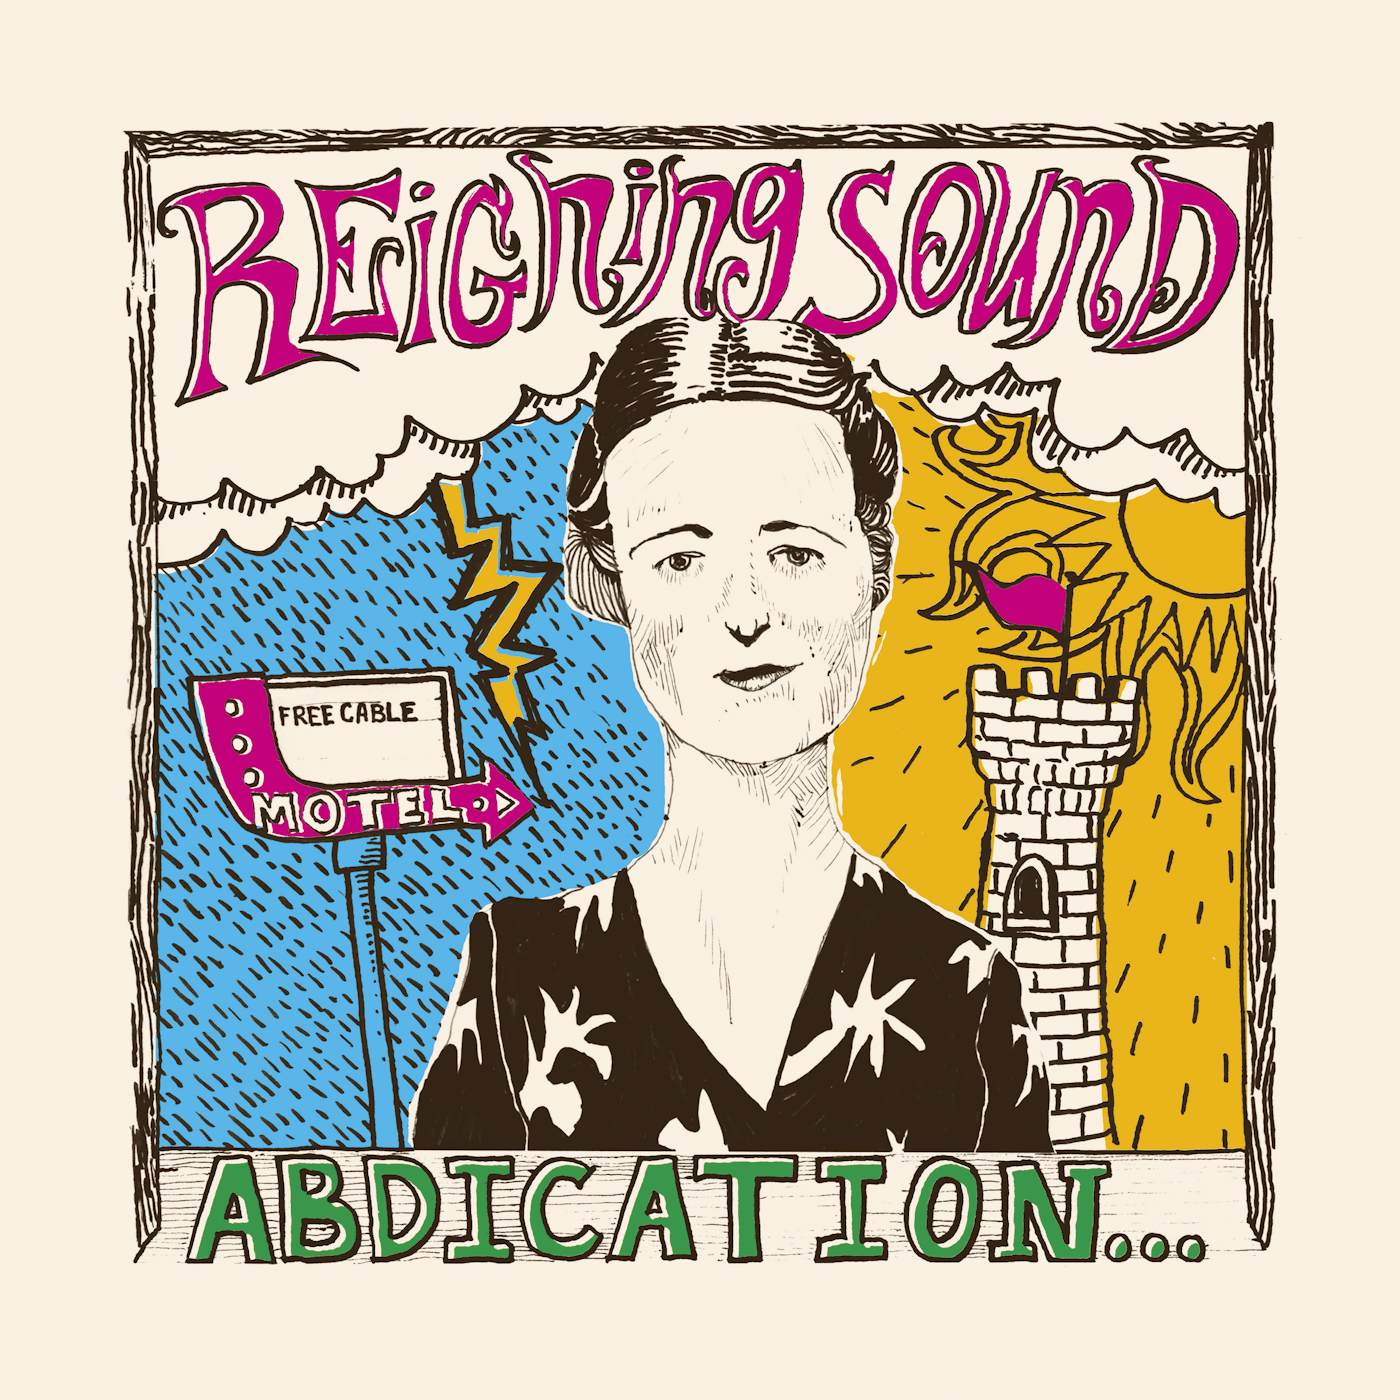 Reigning Sound Abdication...For Your Love Vinyl Record